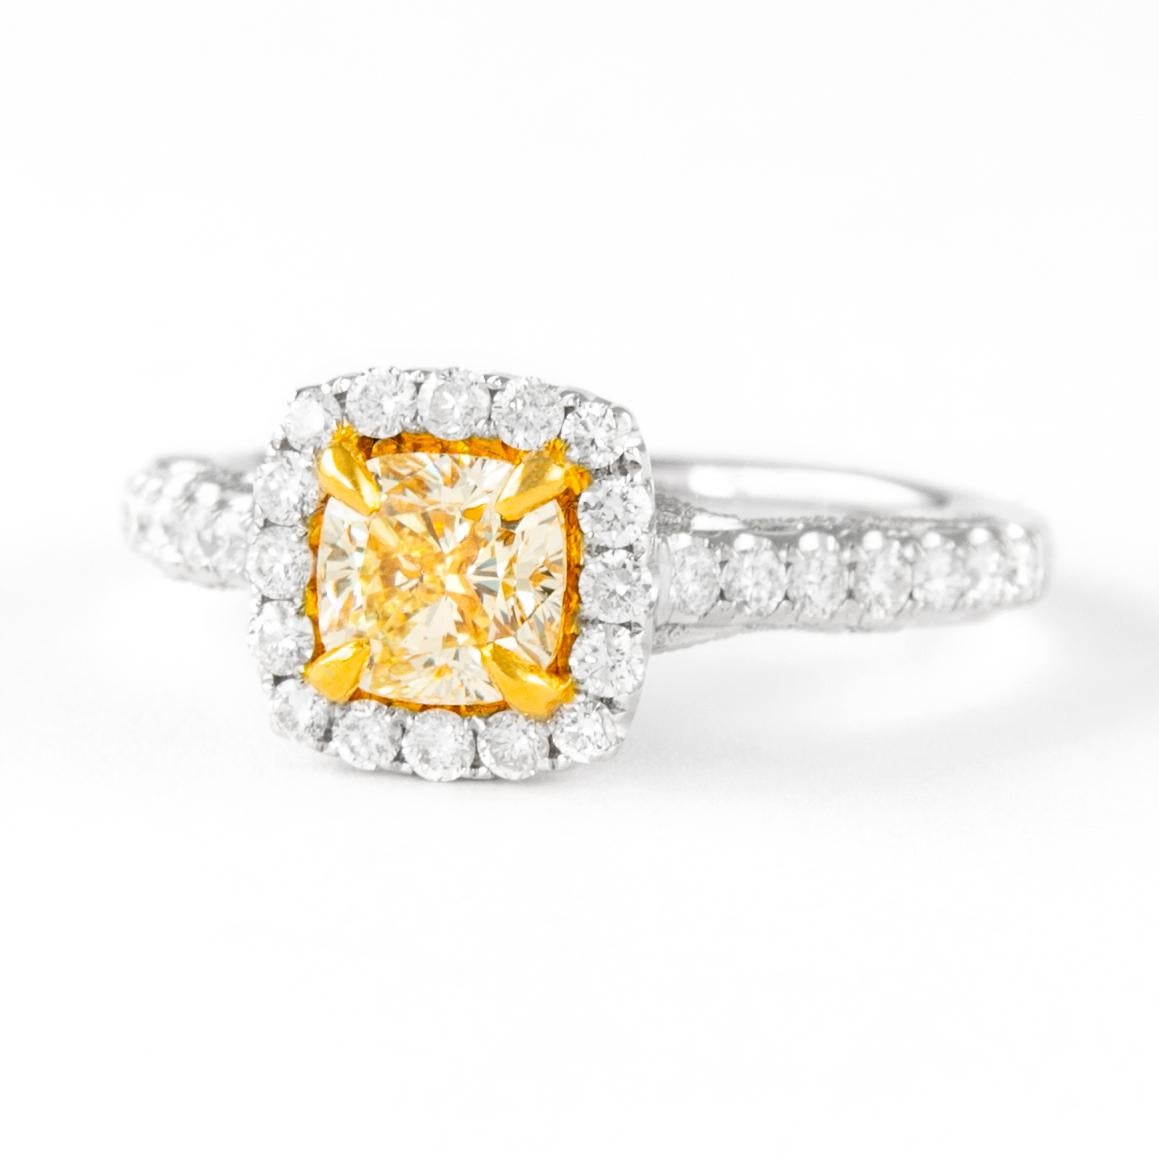 Contemporary Alexander 1.01ct Fancy Intense Yellow Cushion Diamond with Halo Ring 18k For Sale